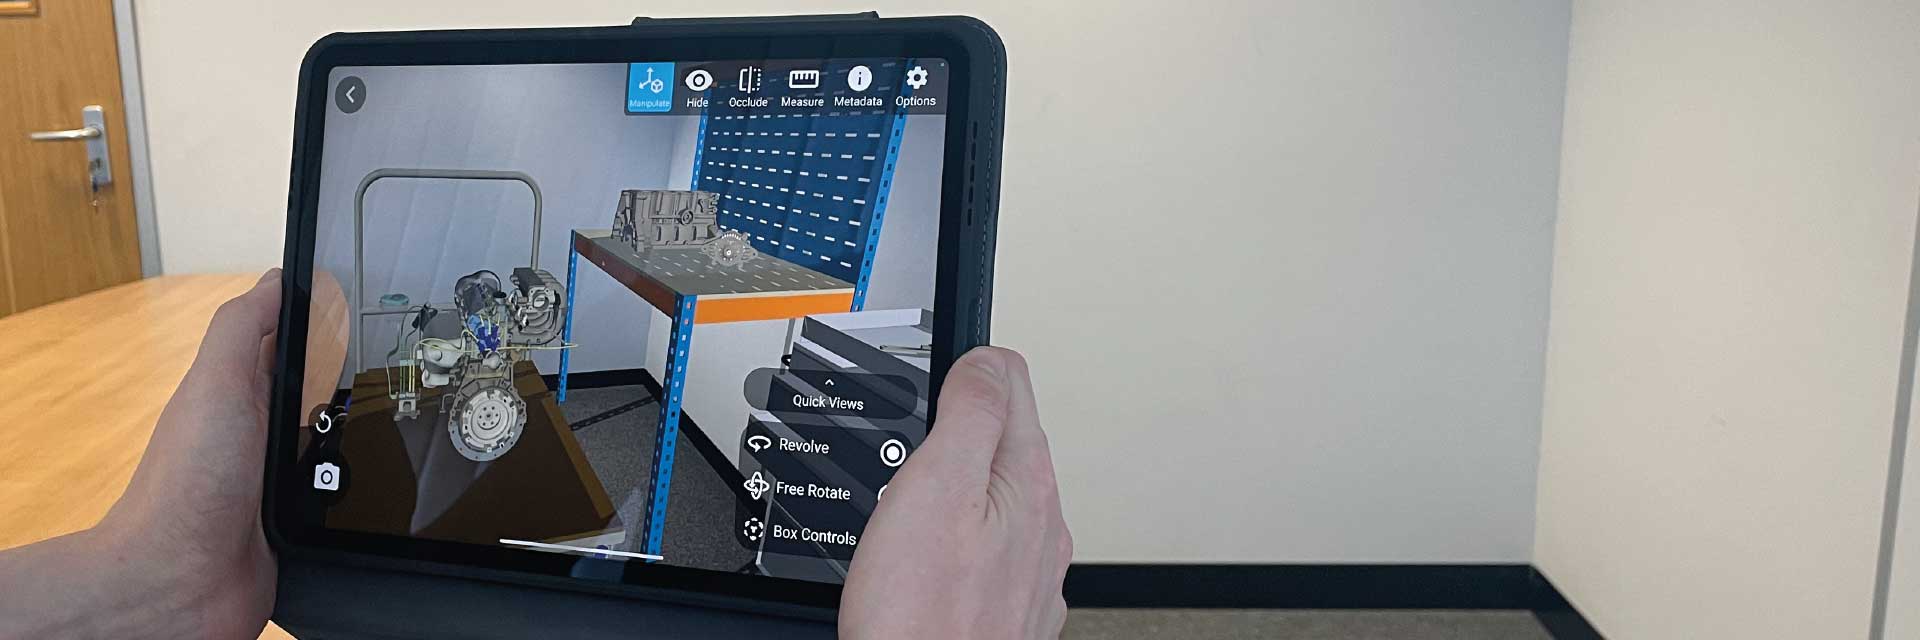 Multiple 3D models being visualized on the Theorem-AR tablet app.